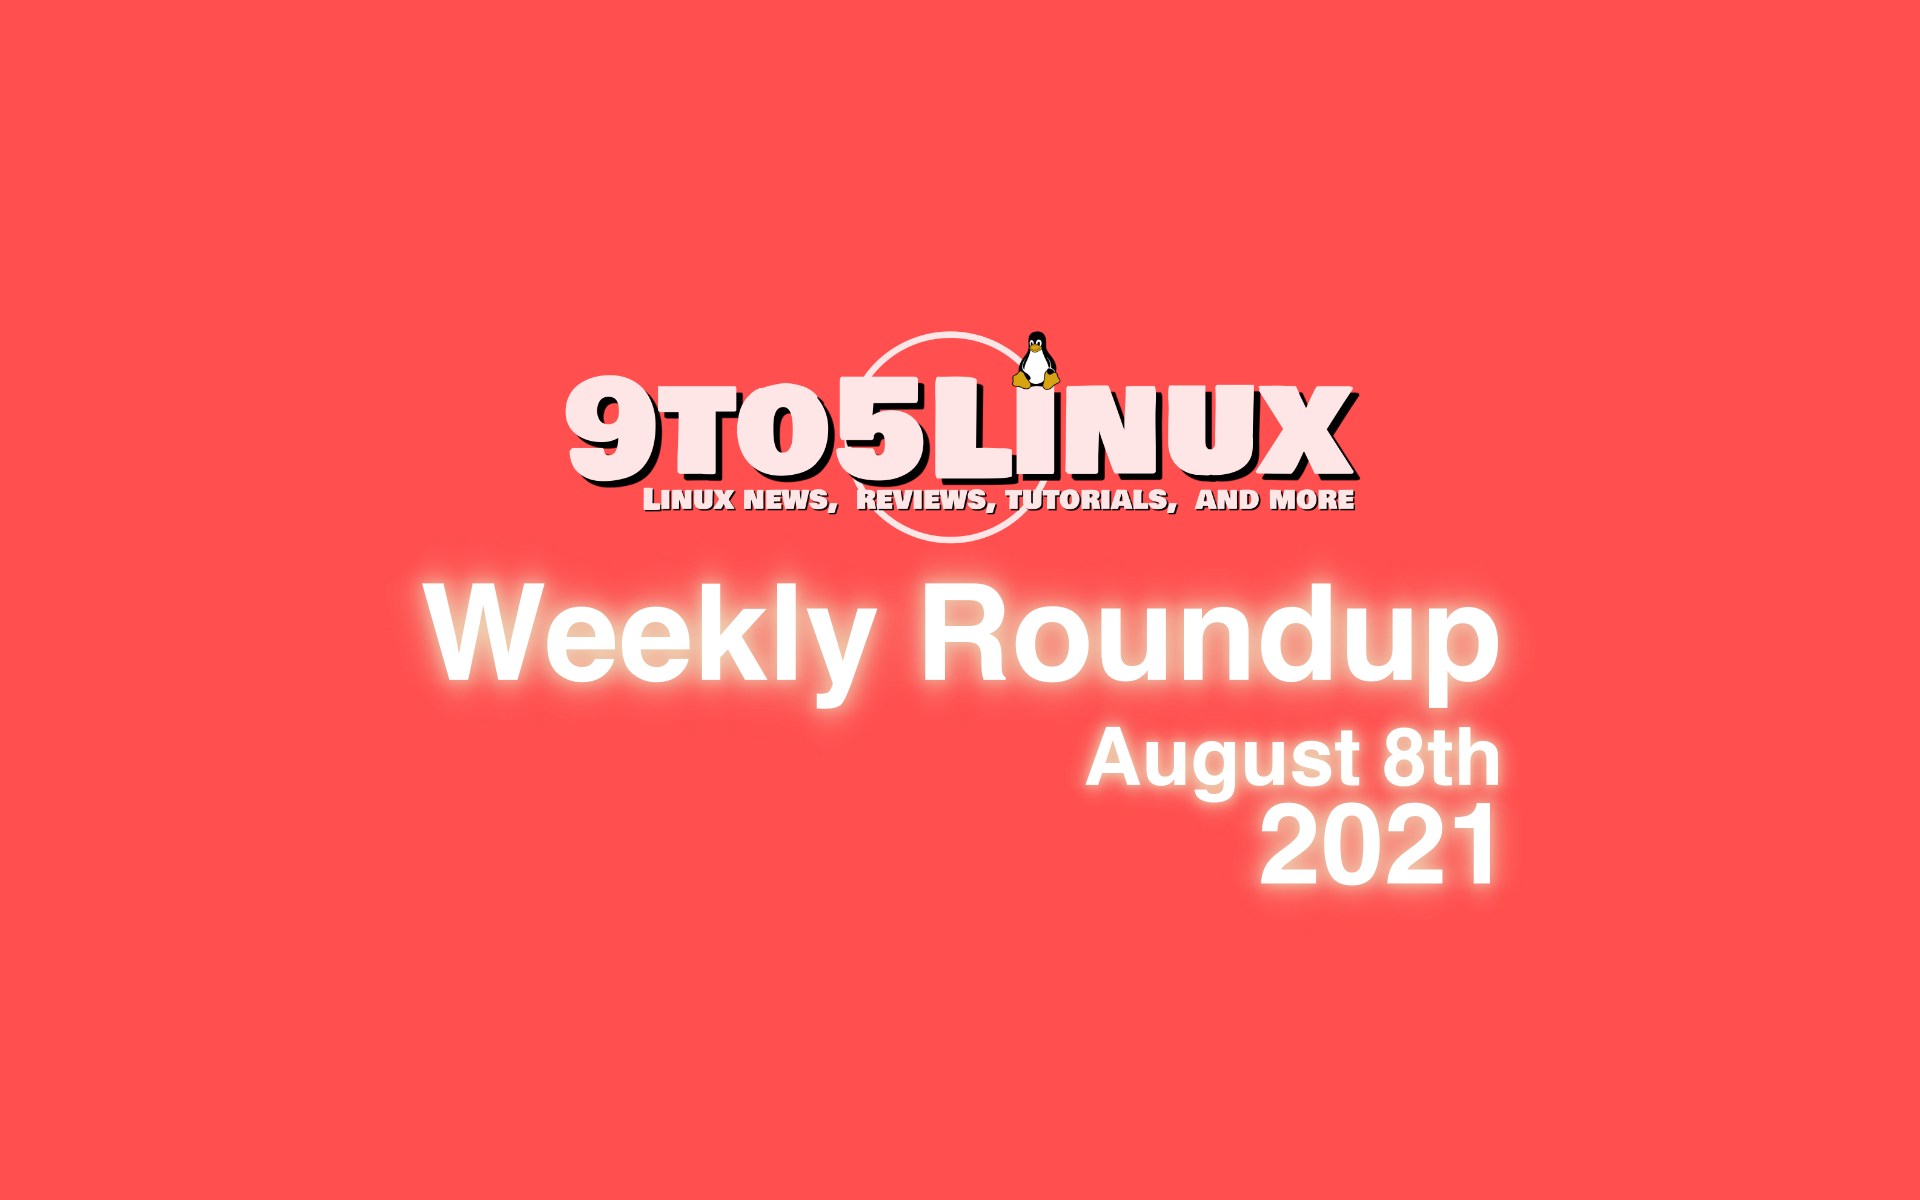 9to5Linux Weekly Roundup: August 8th, 2021